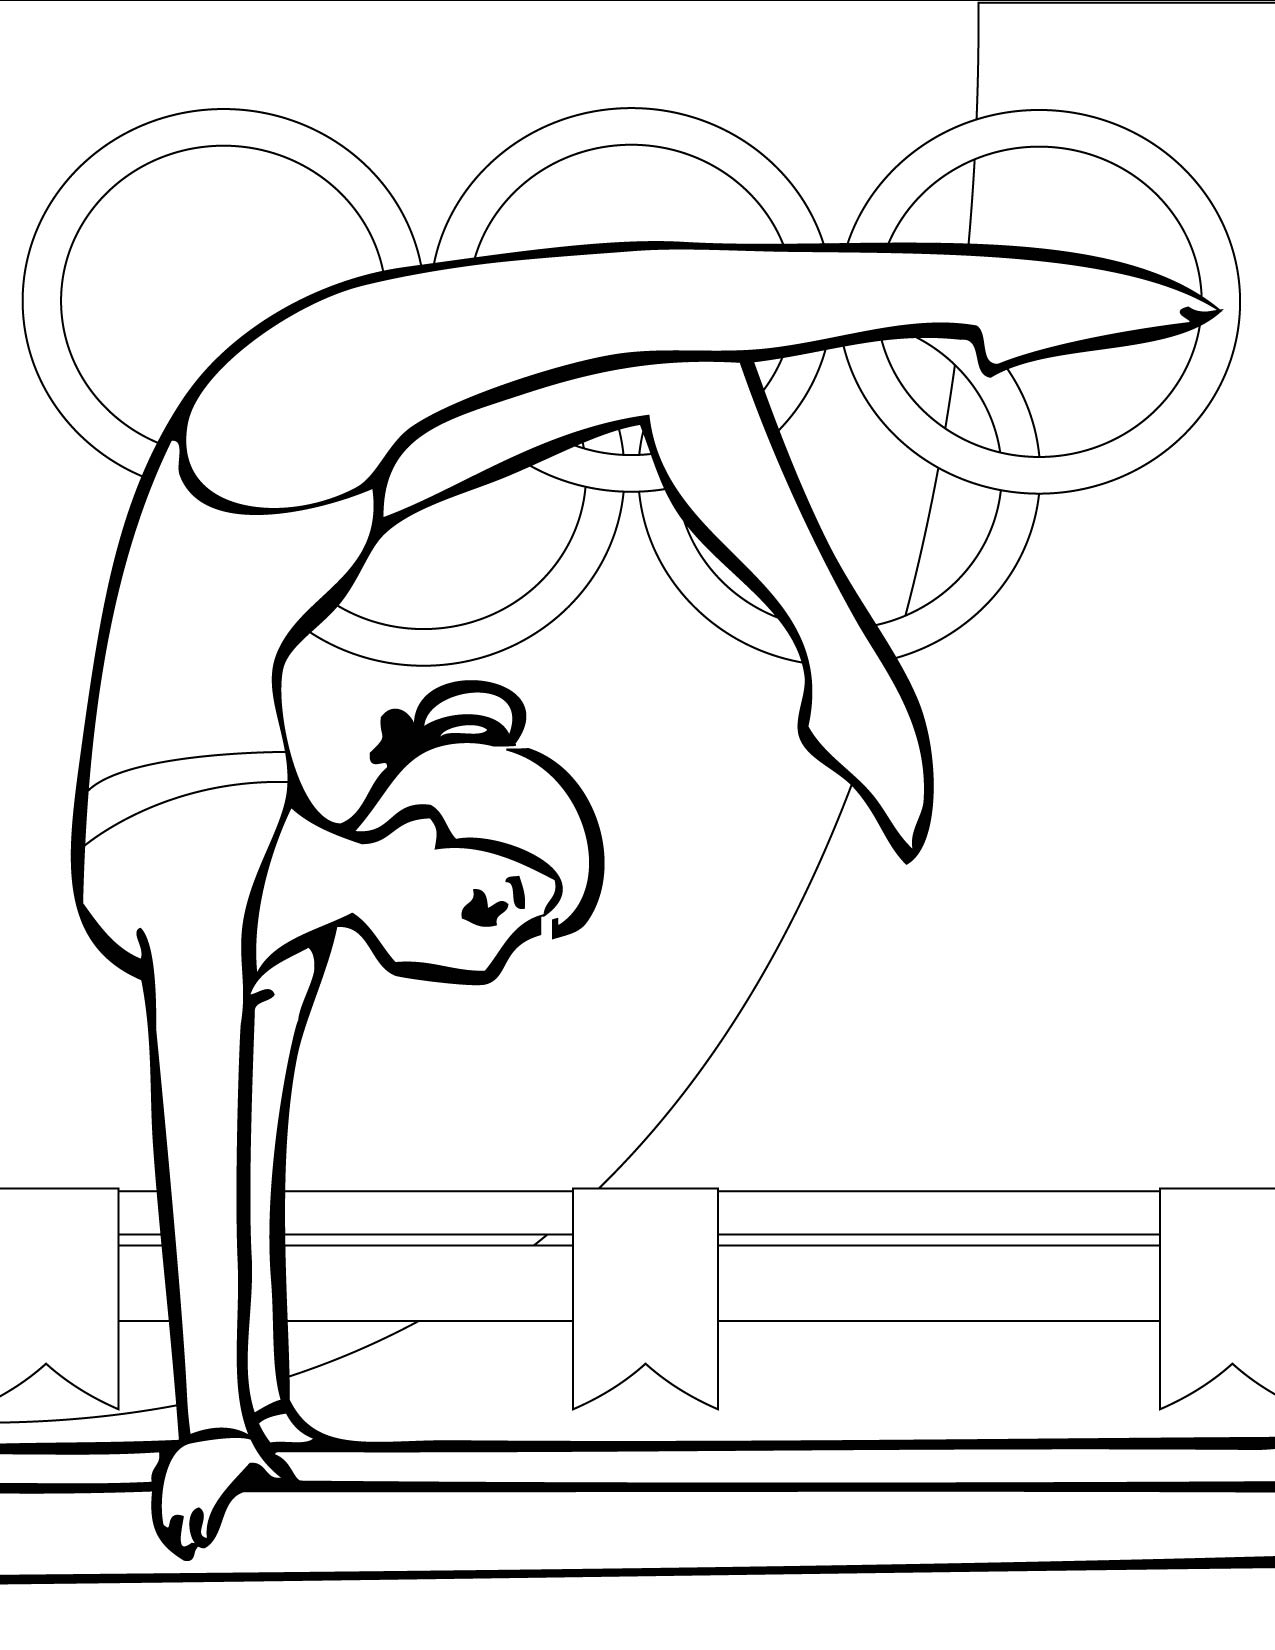 Coloring Pages For Kids Gymnastics The Balance Coloring Page